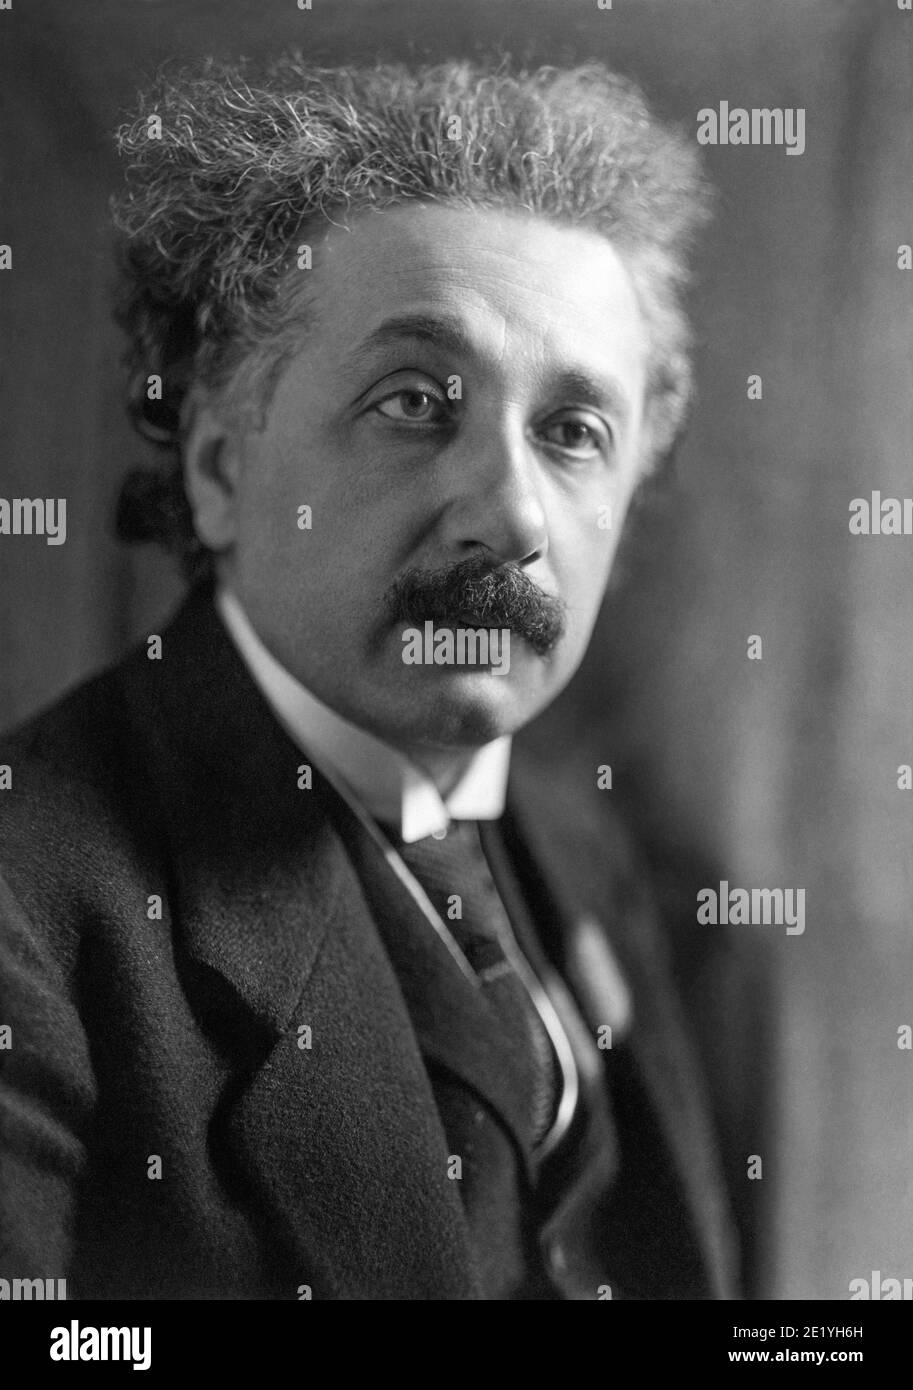 Albert Einstein (1879–1955), German-born theoretical physicist who developed the theory of relativity, in a portrait by Harris & Ewing Studio in 1921, the year Einstein received the Nobel Prize for Physics. Stock Photo